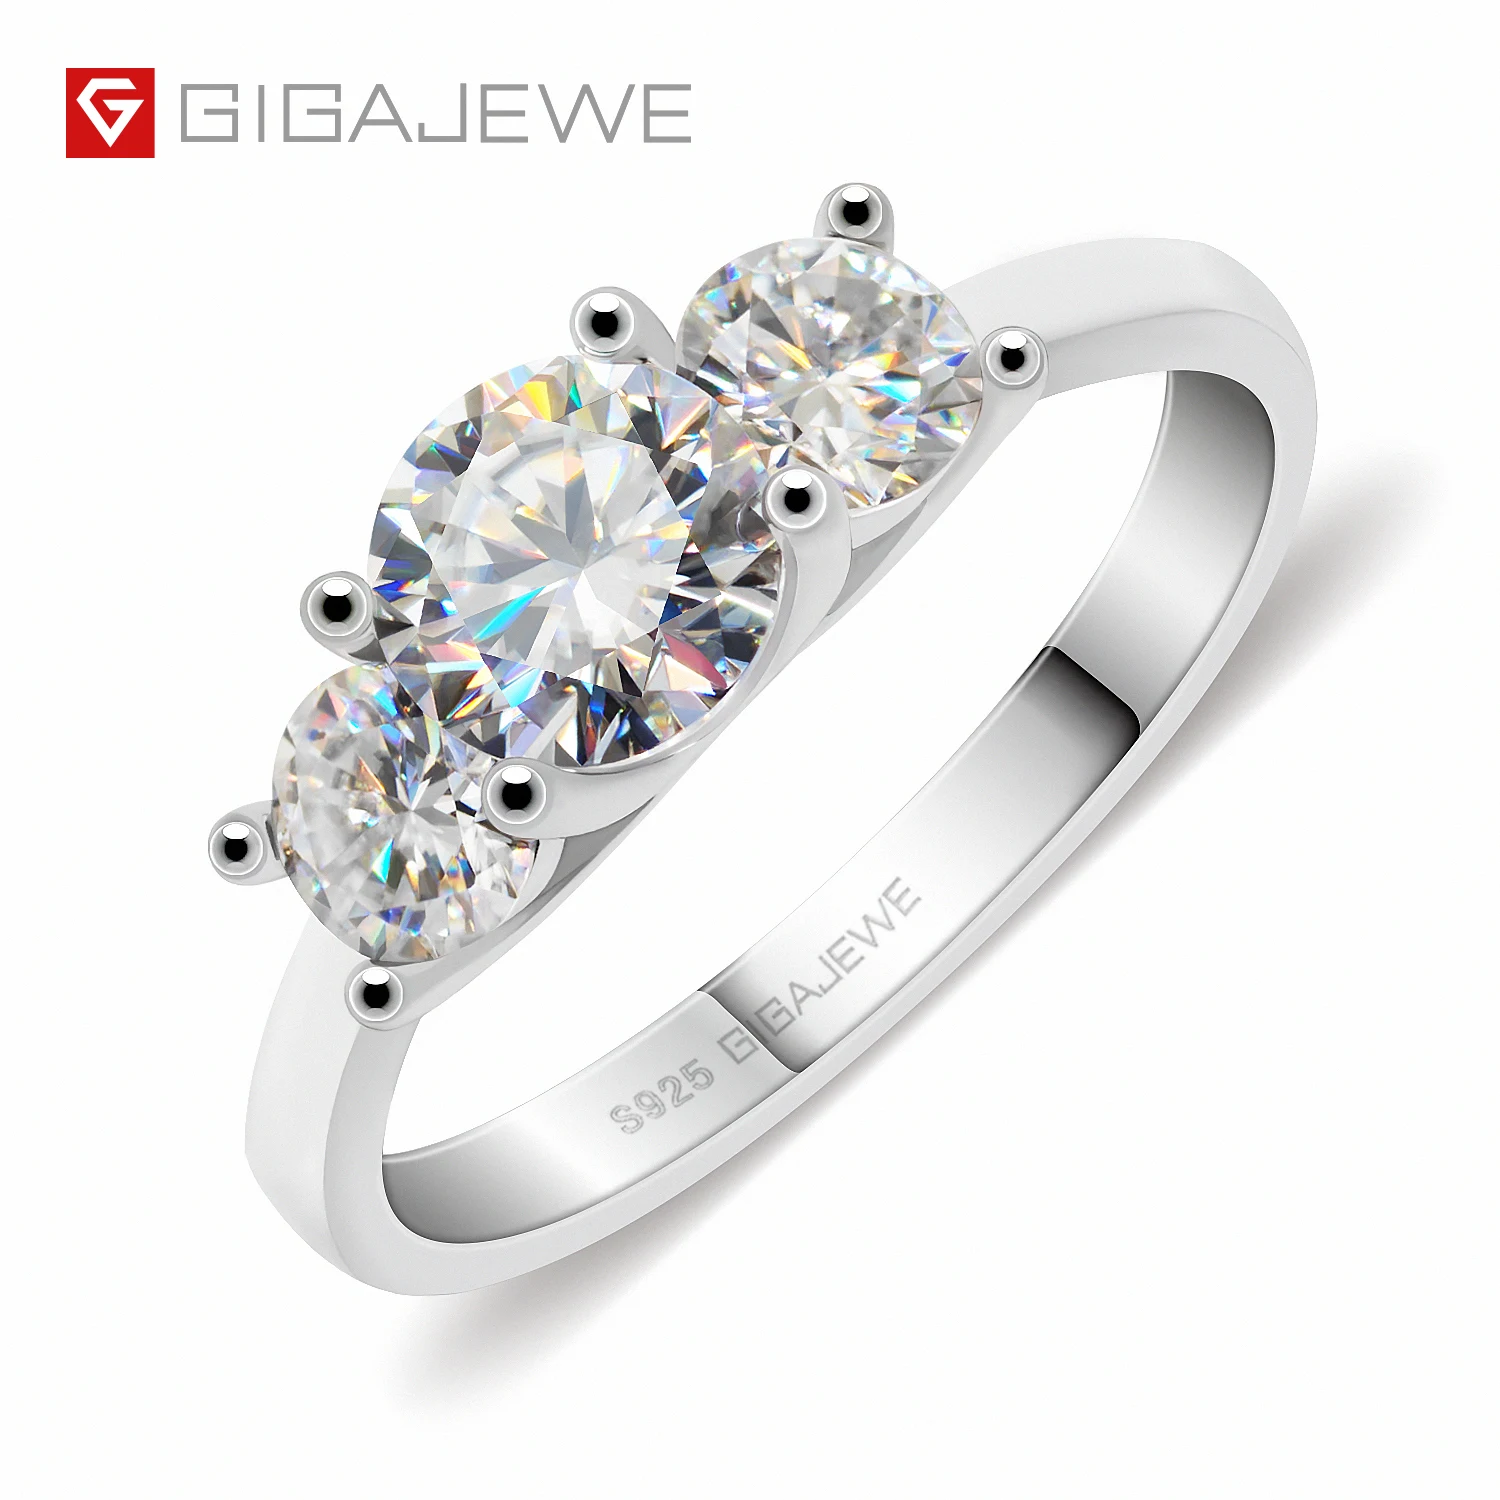 

GIGAJEWE Moissanite 1.2ct 5.5mm+2X4.0mm Round Cut EF Color 925 Silver Ring Gold Multi-layer Plated Fashion Girlfriend Gift, White f color